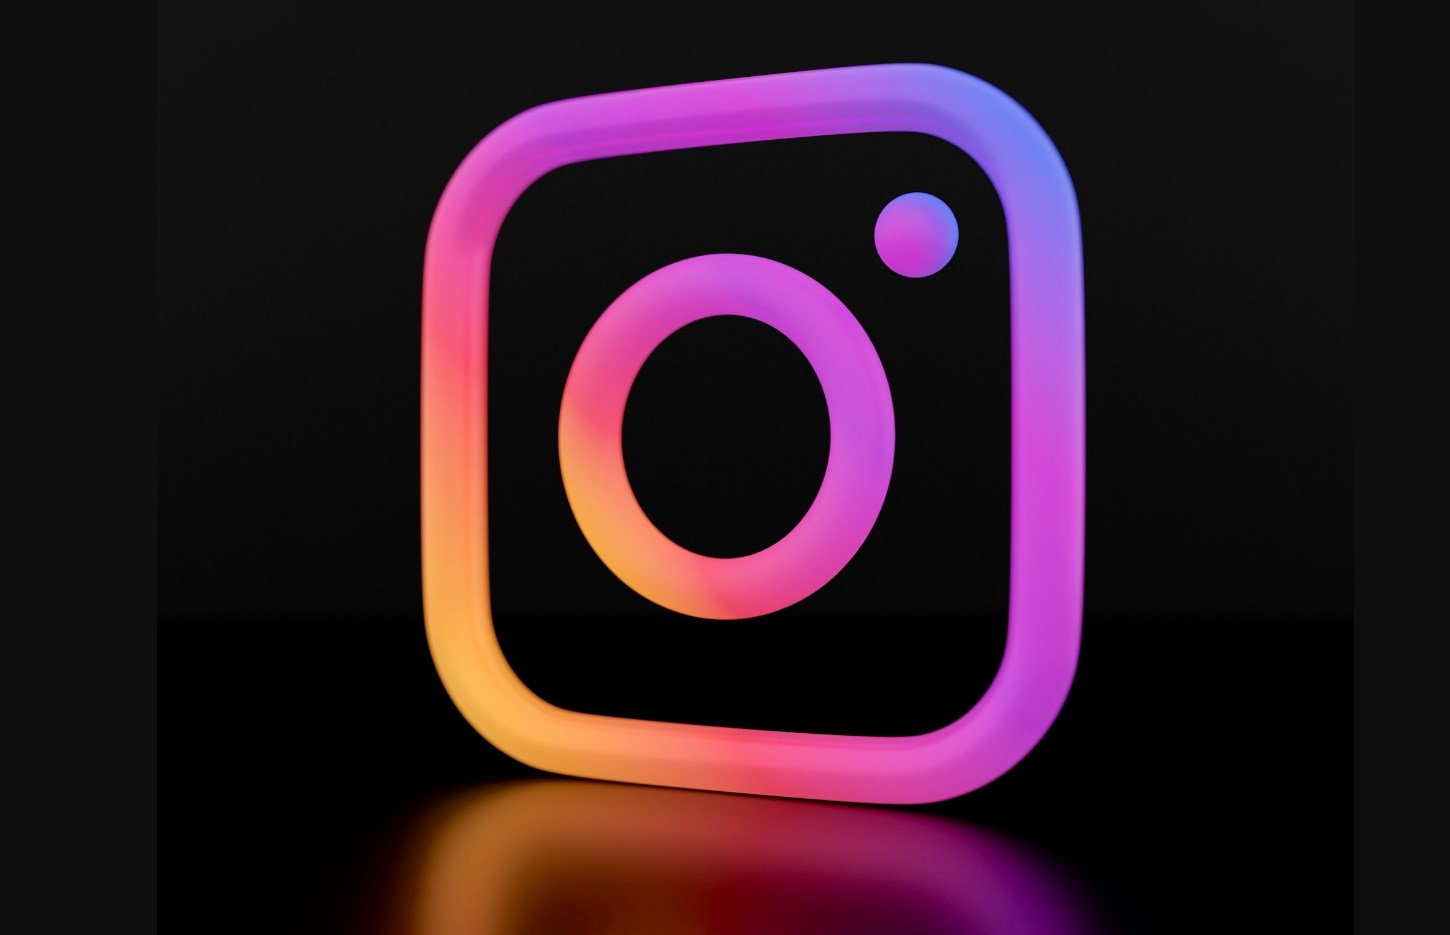 How to Convert Instagram to MP4 on iPhone